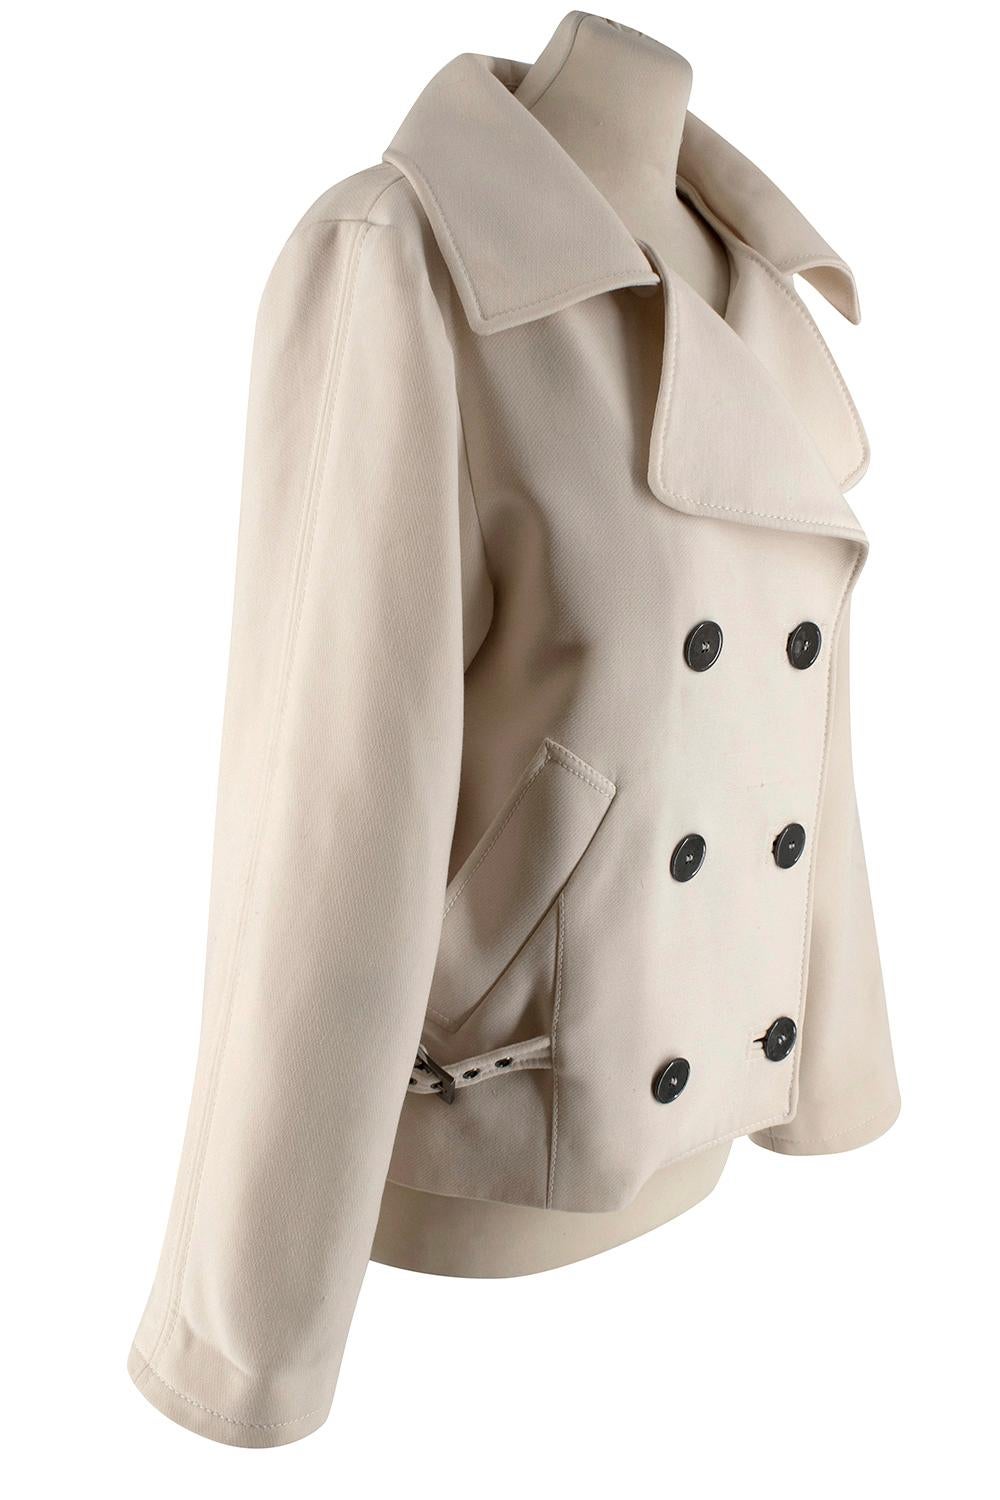 Dolce & Gabbana Women's Beige Jacket

- Double breasted Jacket
- Soft touch light beige fabric 
- Dark, metalic button fastening, including inside buttons 
- Two side pockets
- Dolce & Gabbana print silk lining 
- Wide Collar 
- Detachable panel on